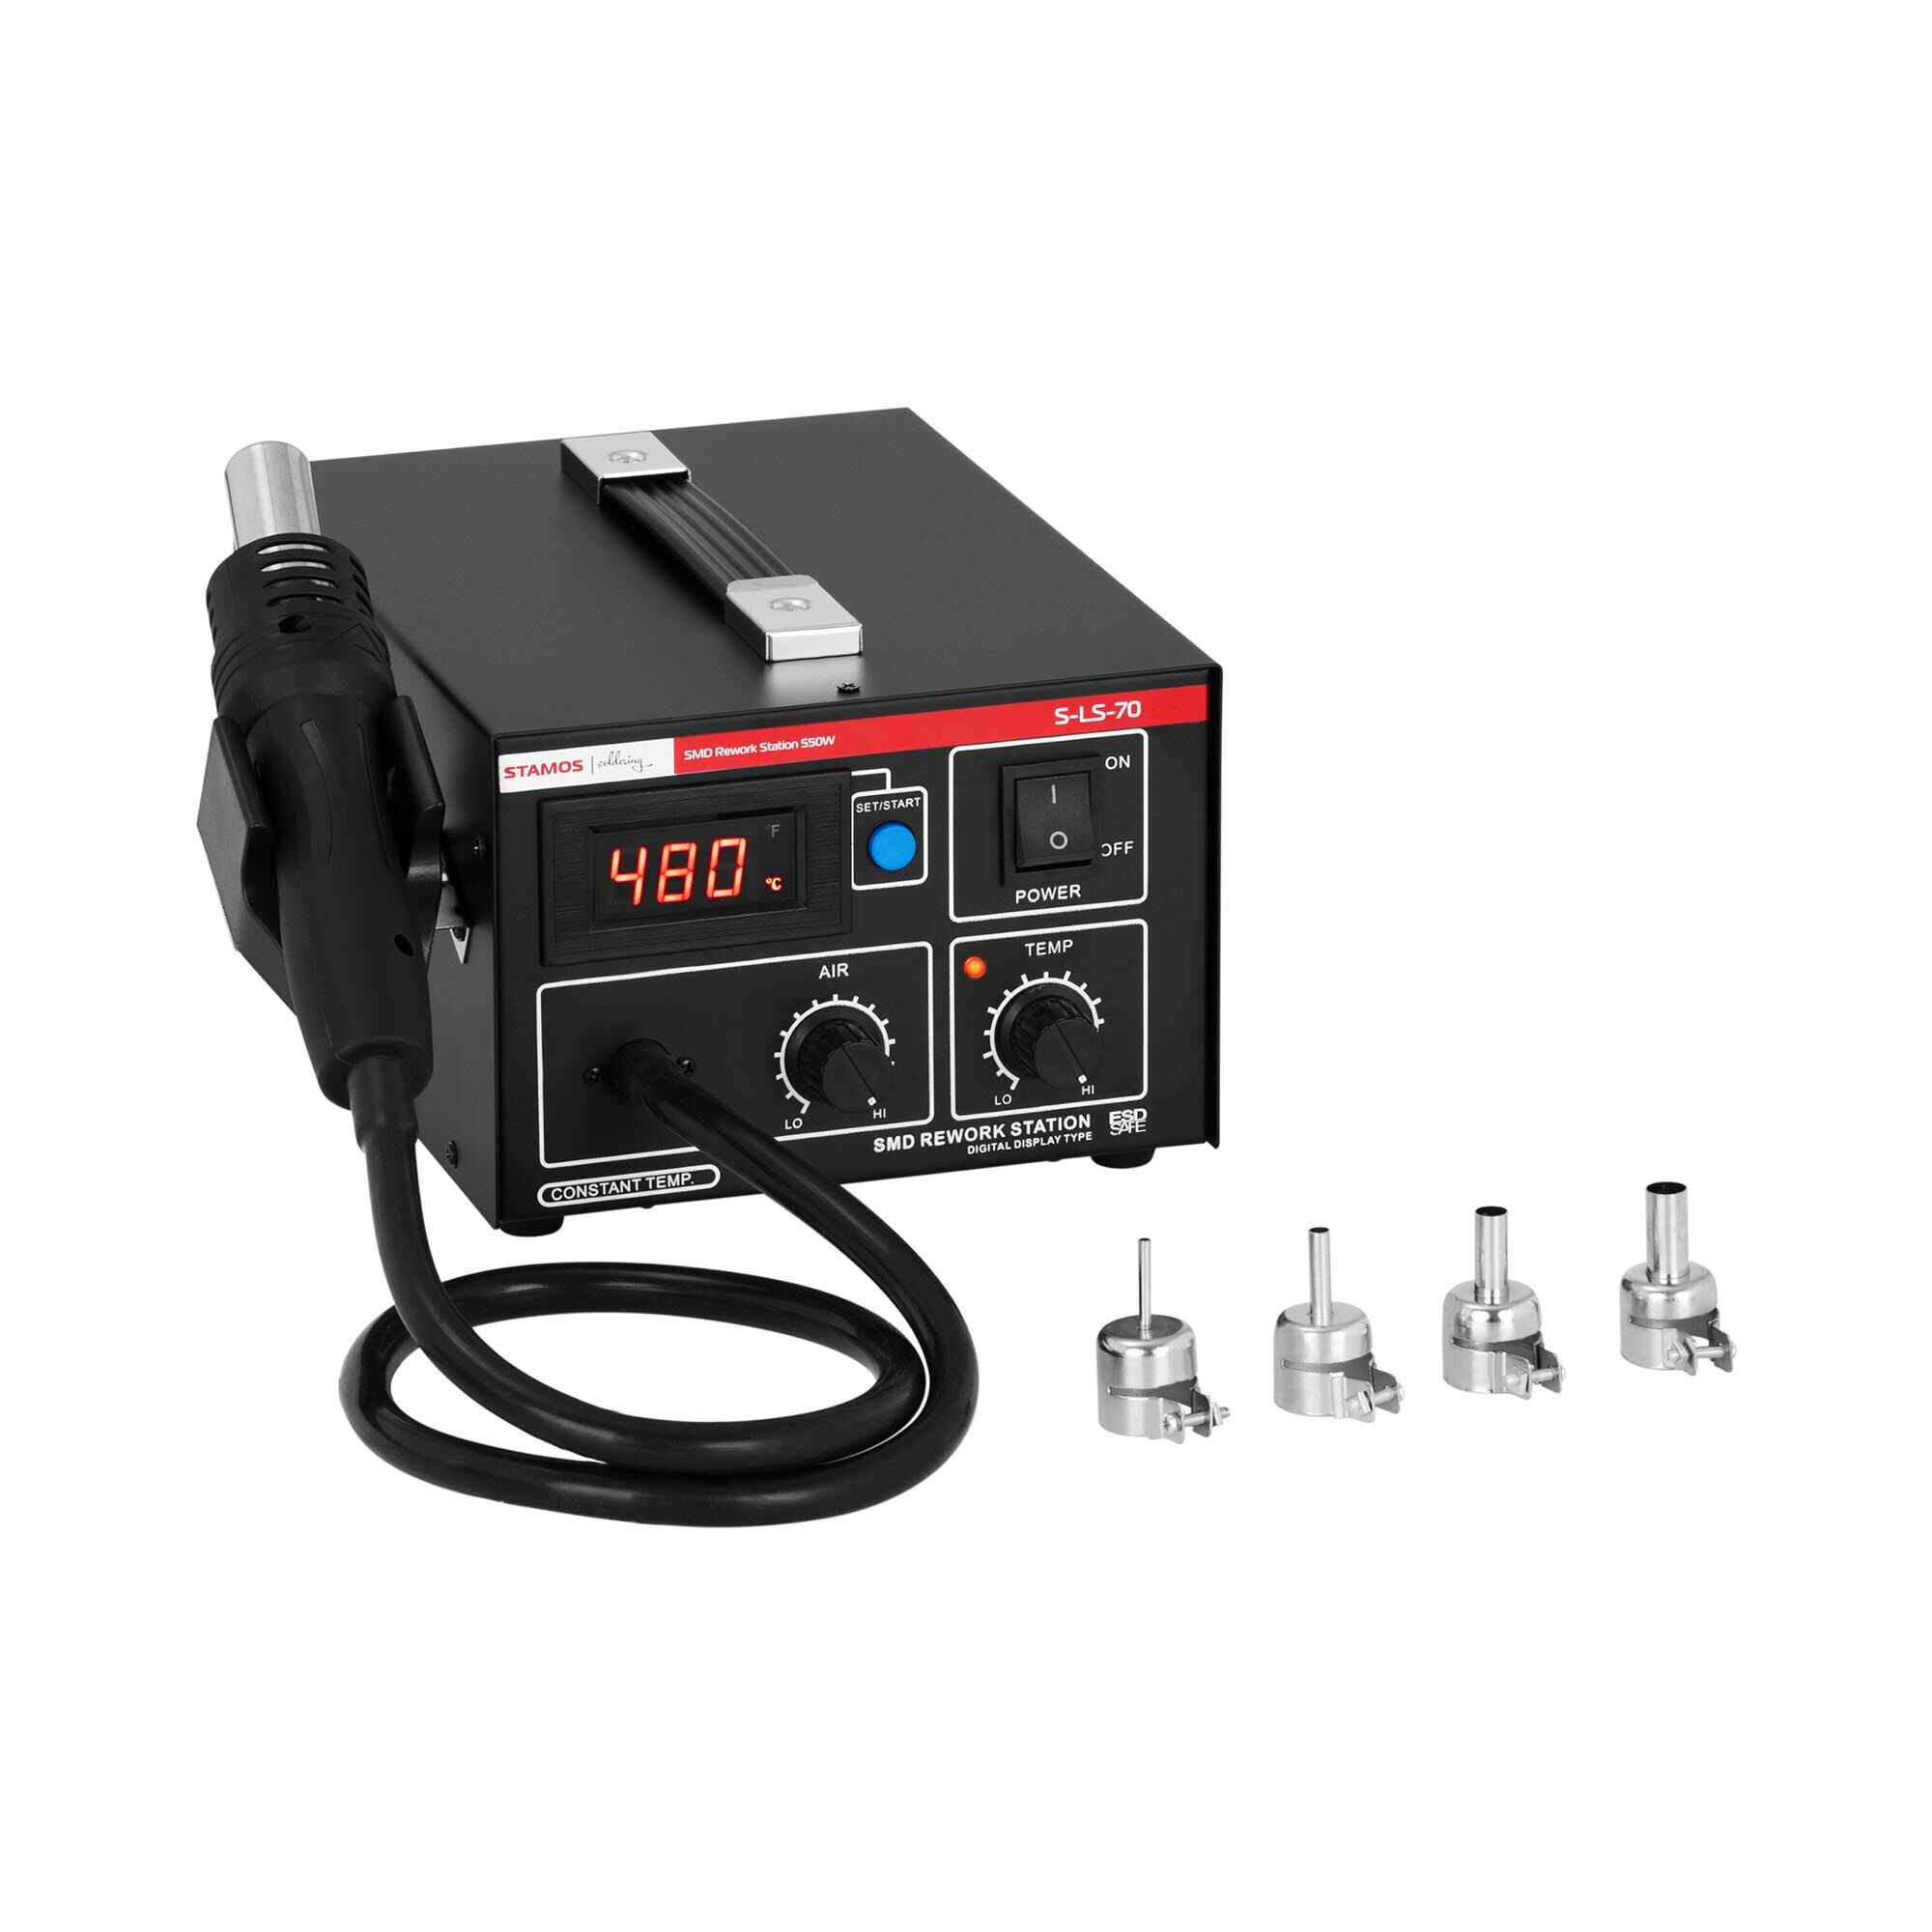 Stamos Soldering Soldering Station - with hot air gun - 550 W - LED display S-LS-70